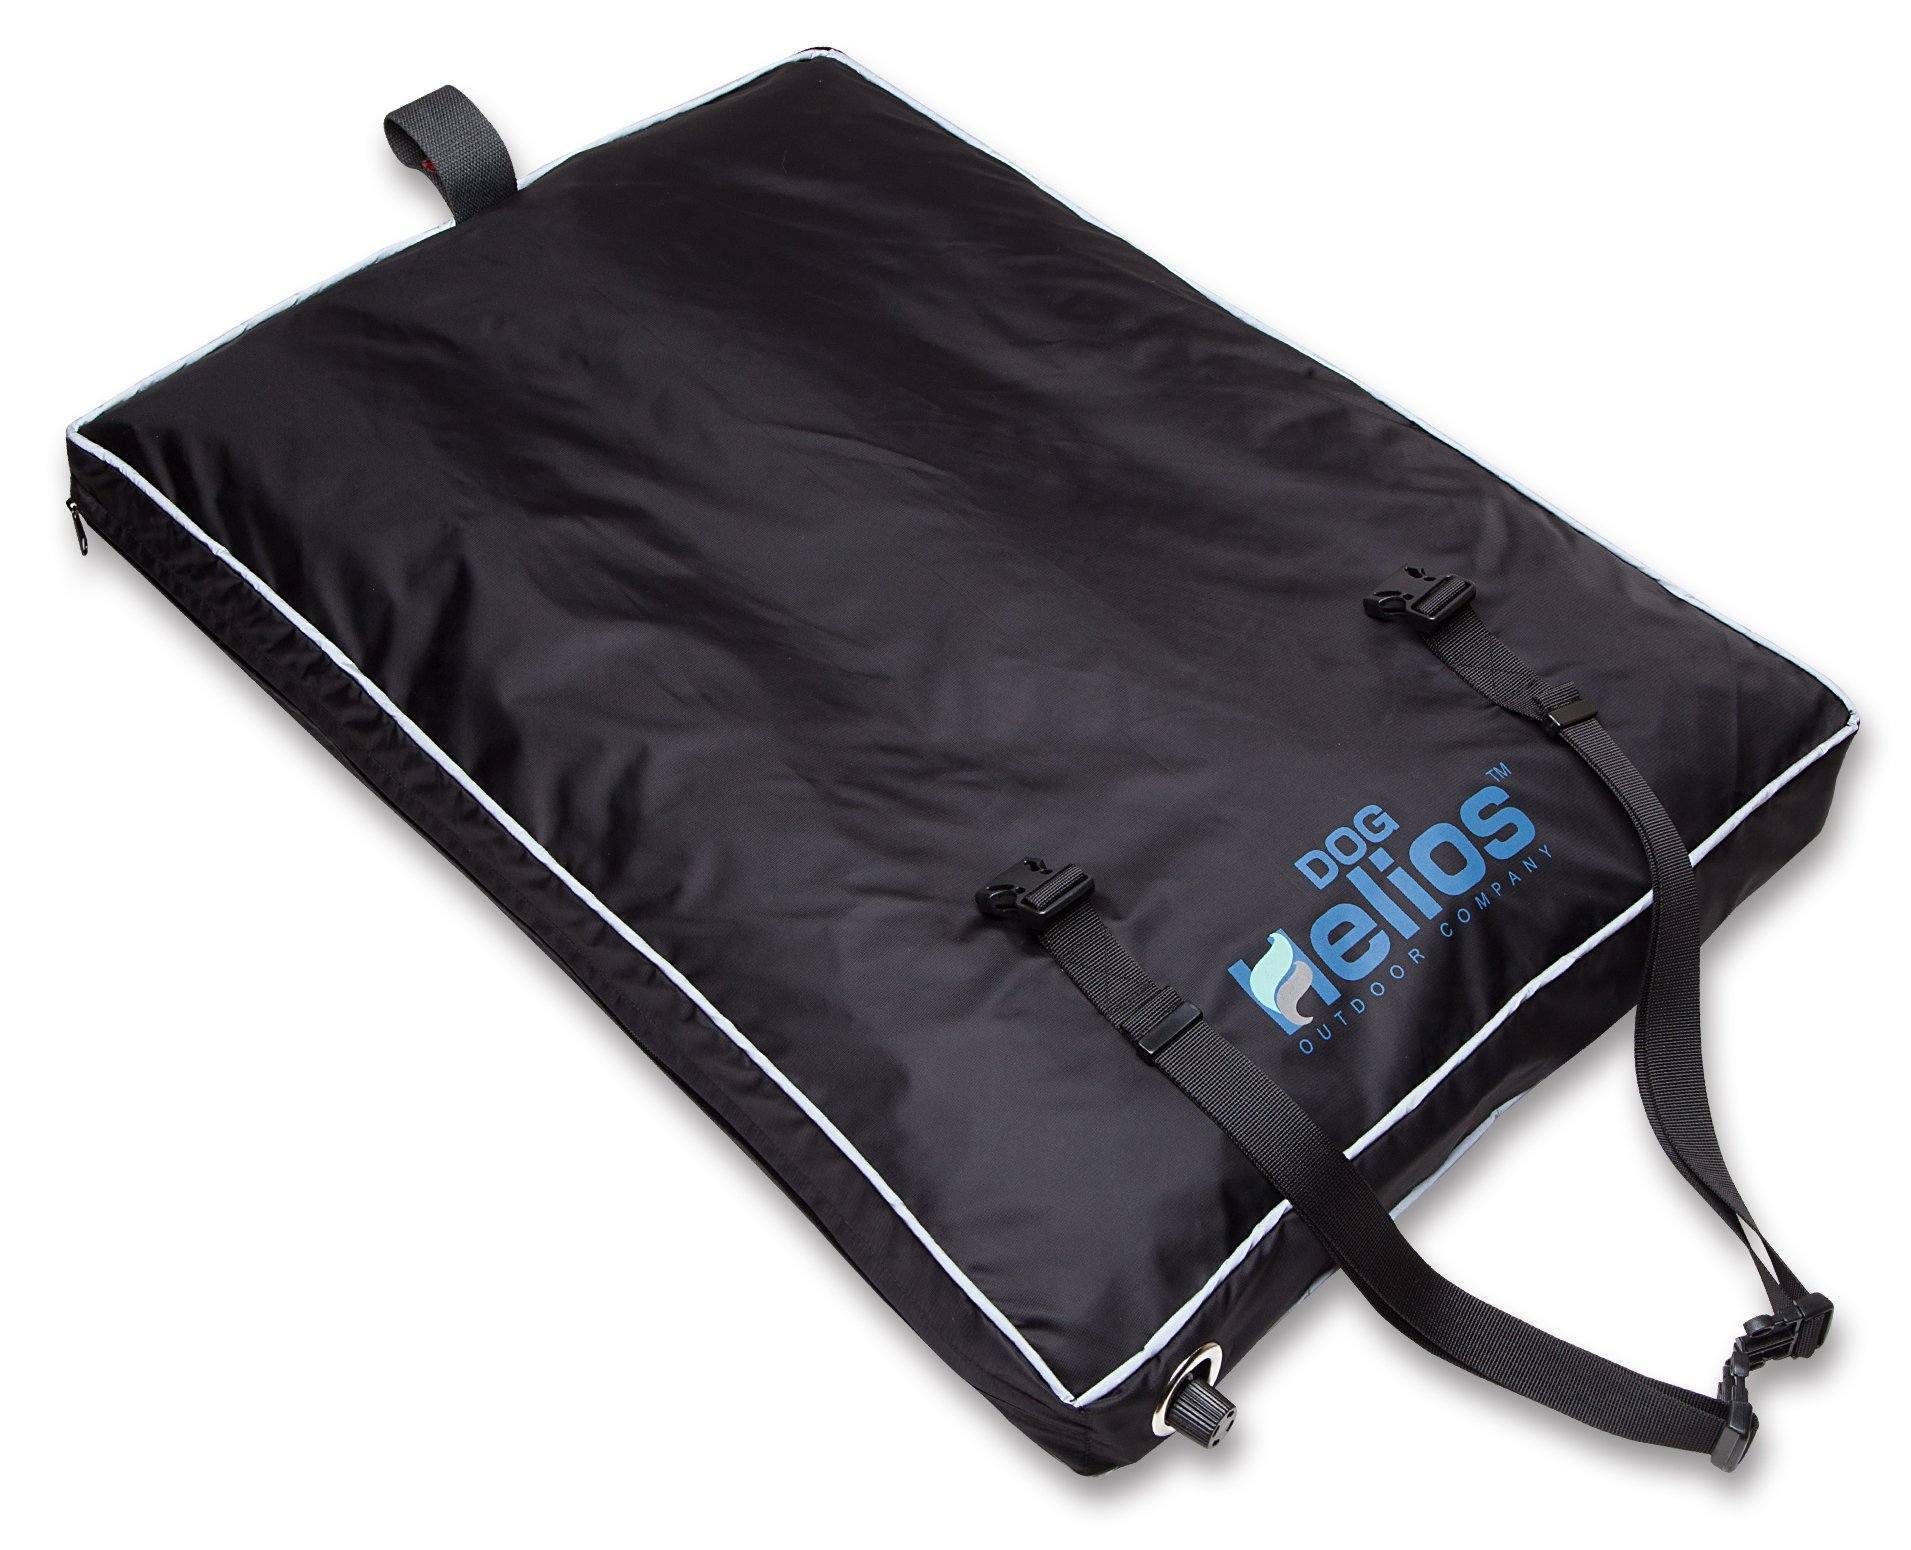 Dog Helios ® 'Aero-Inflatable' Folding Waterproof Inflatable Travel Camping Dog Bed Small Black